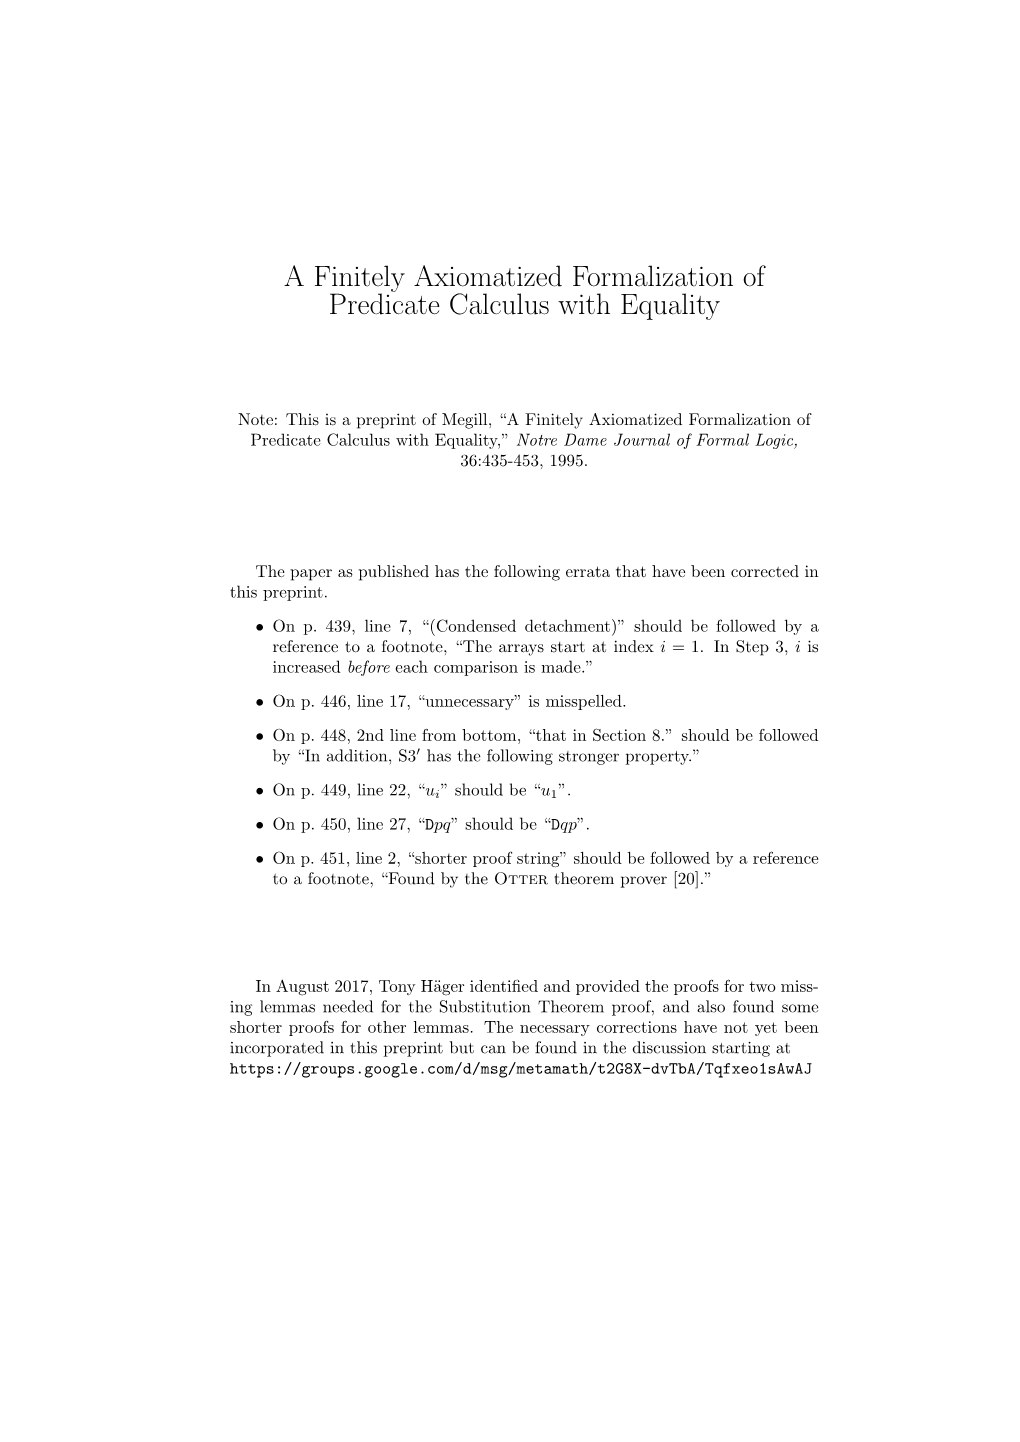 A Finitely Axiomatized Formalization of Predicate Calculus with Equality